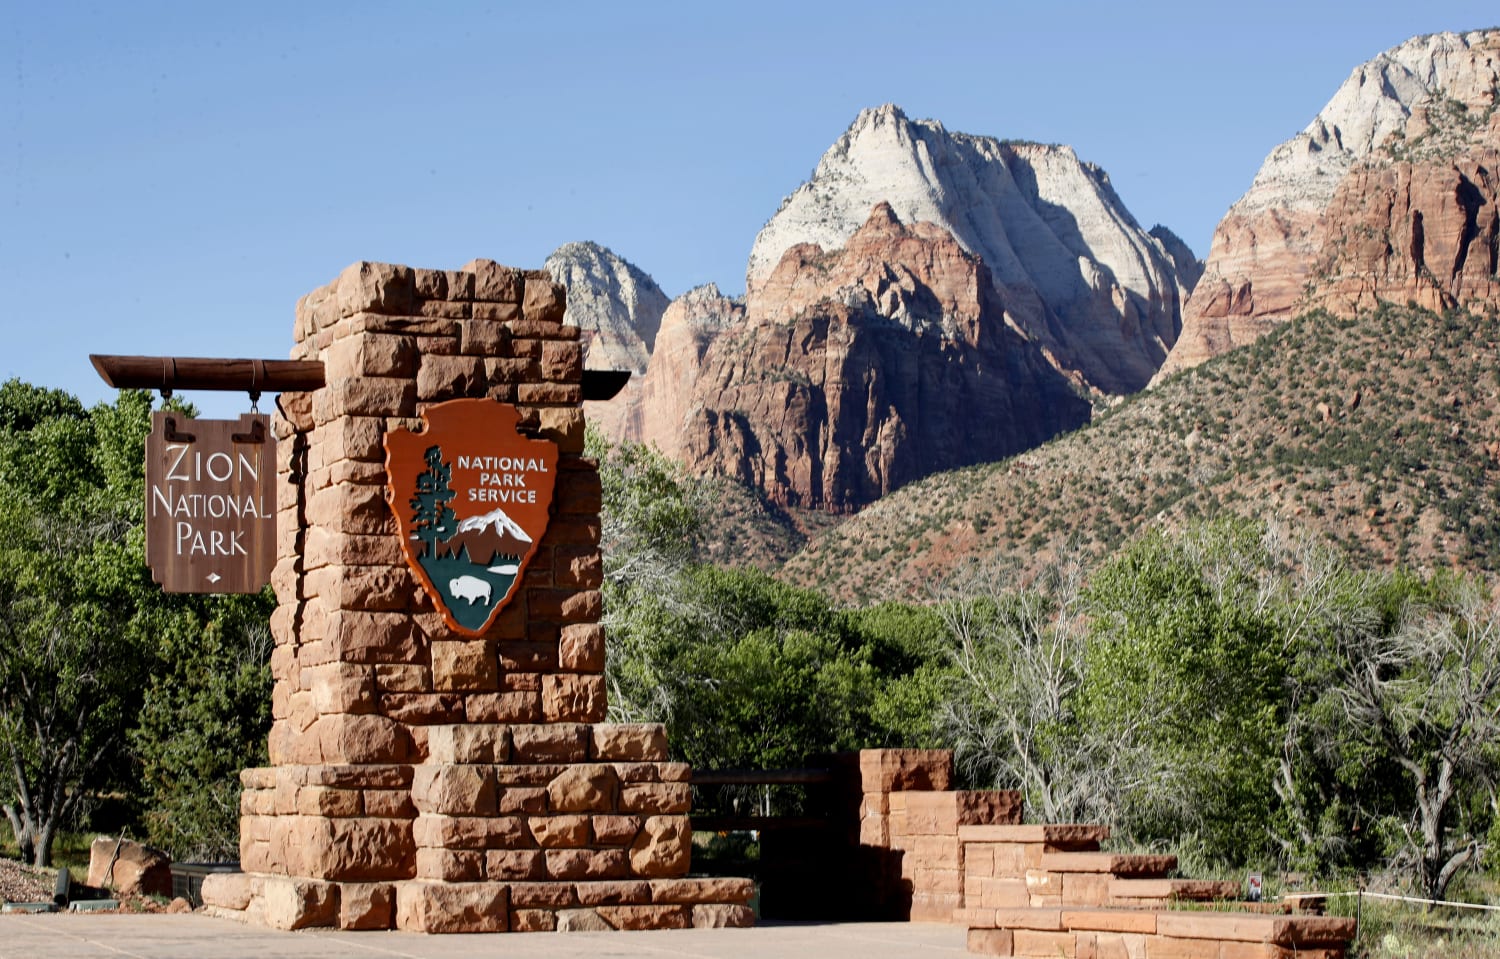 Zion-National-Park-visitor-dies-on-overnight-hiking-trip-with-husband